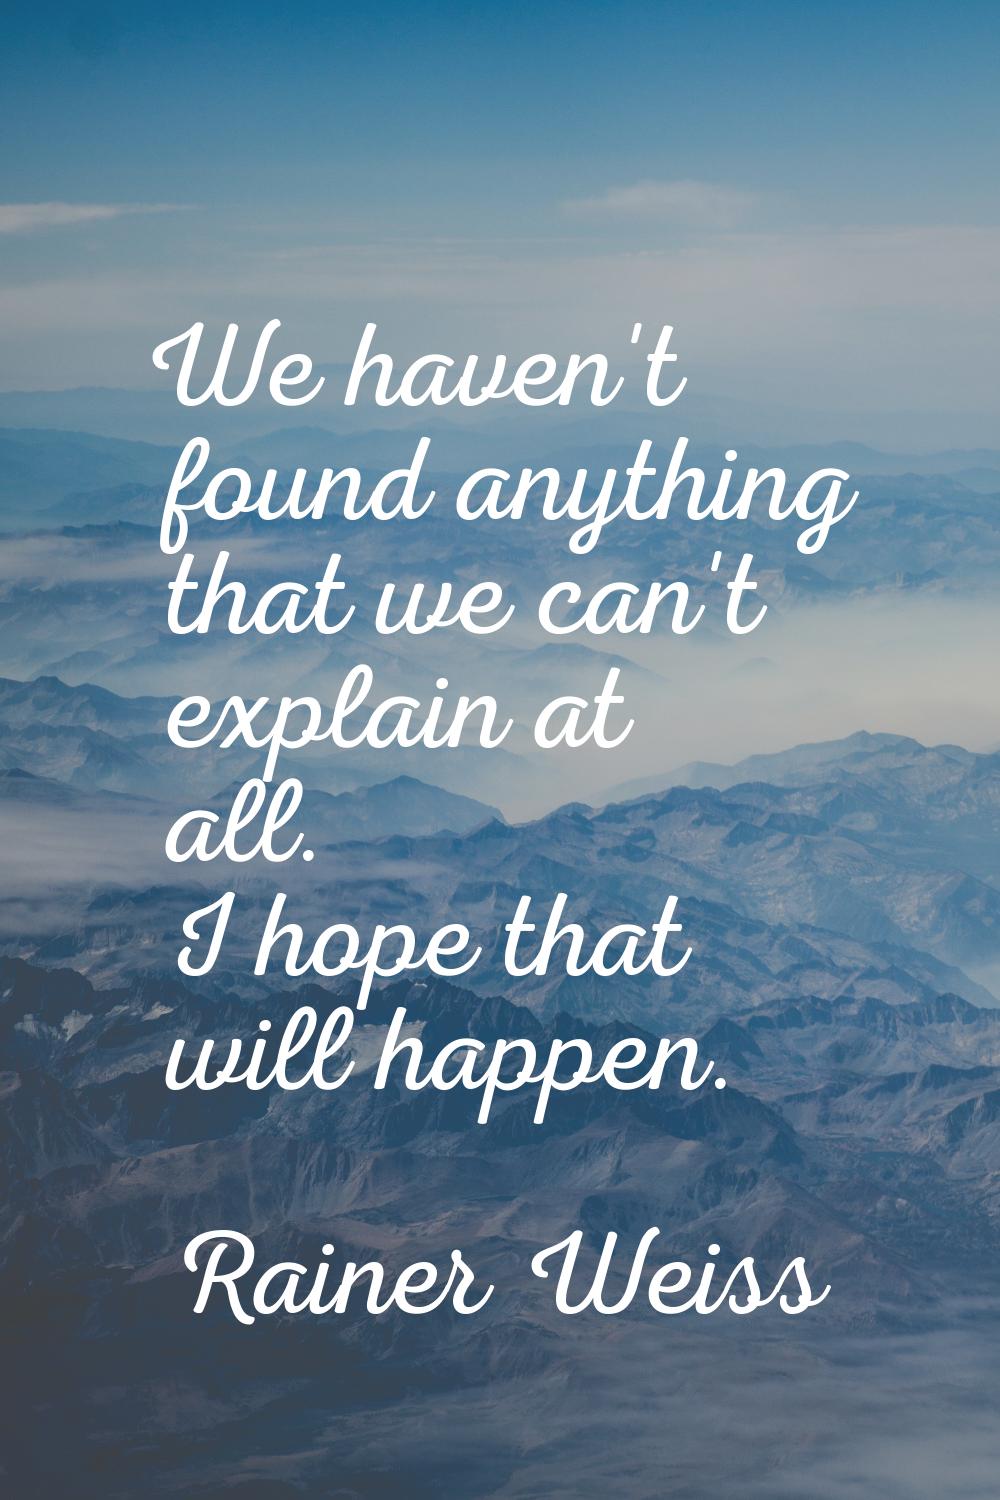 We haven't found anything that we can't explain at all. I hope that will happen.